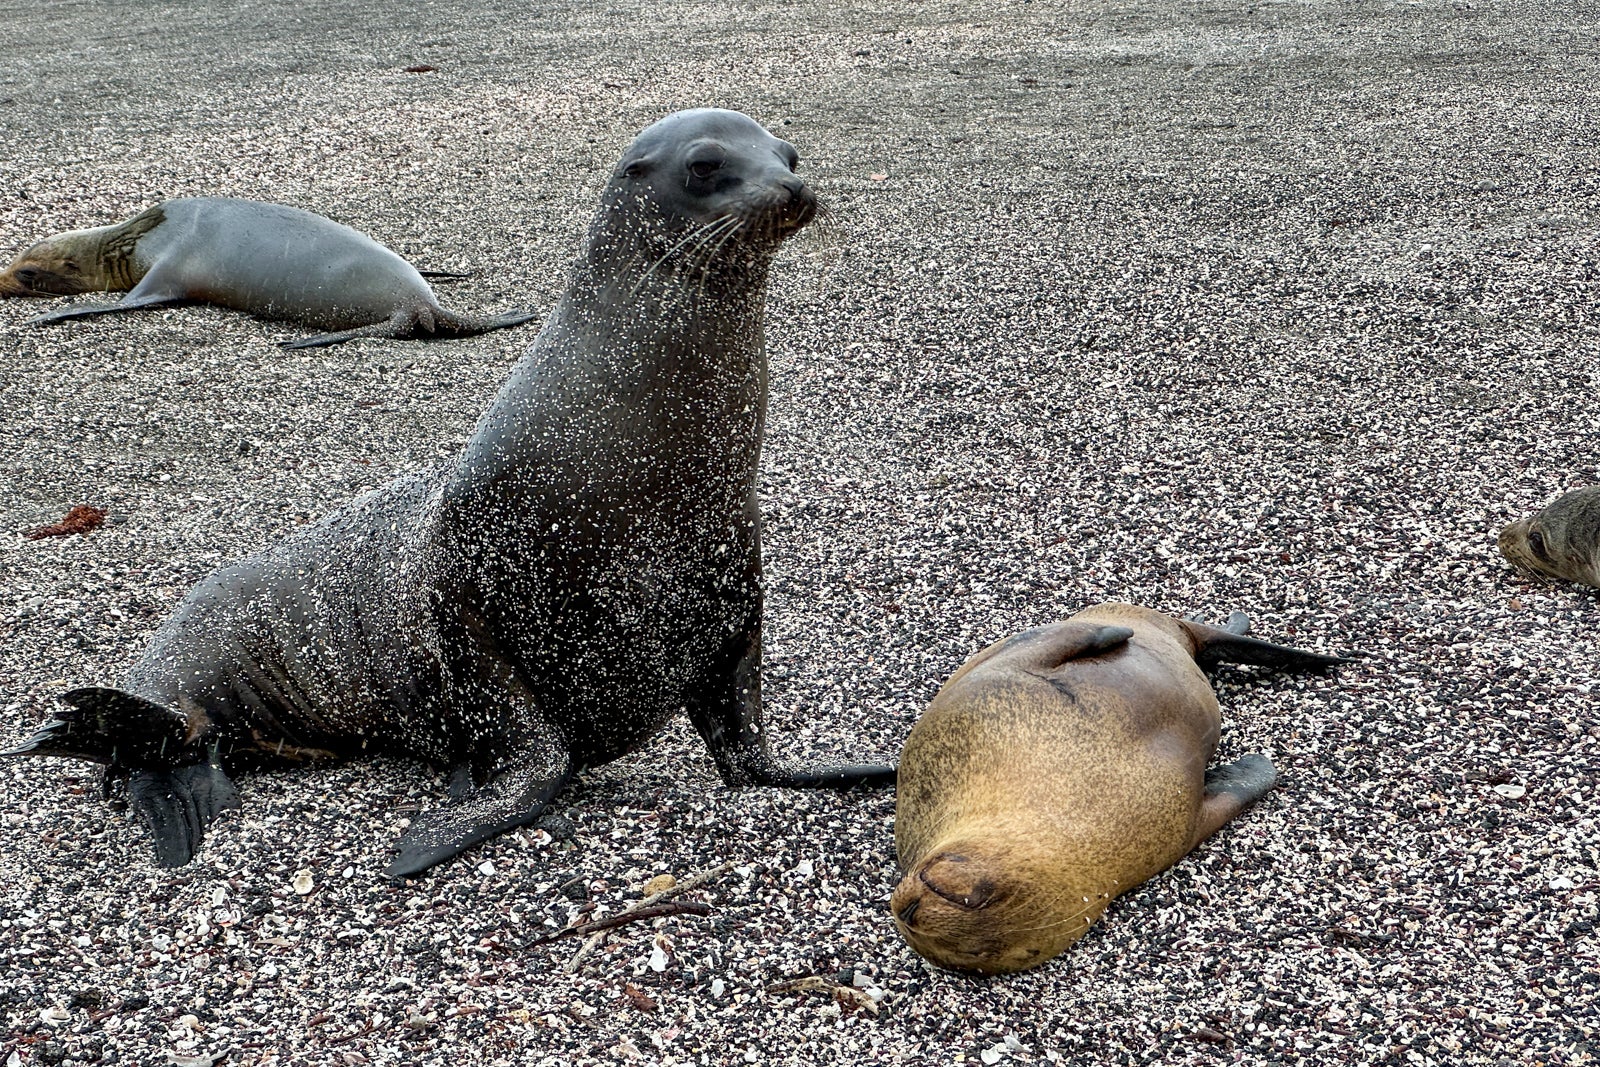 Sea lions pose on a rocky beach in the Galapagos Islands.